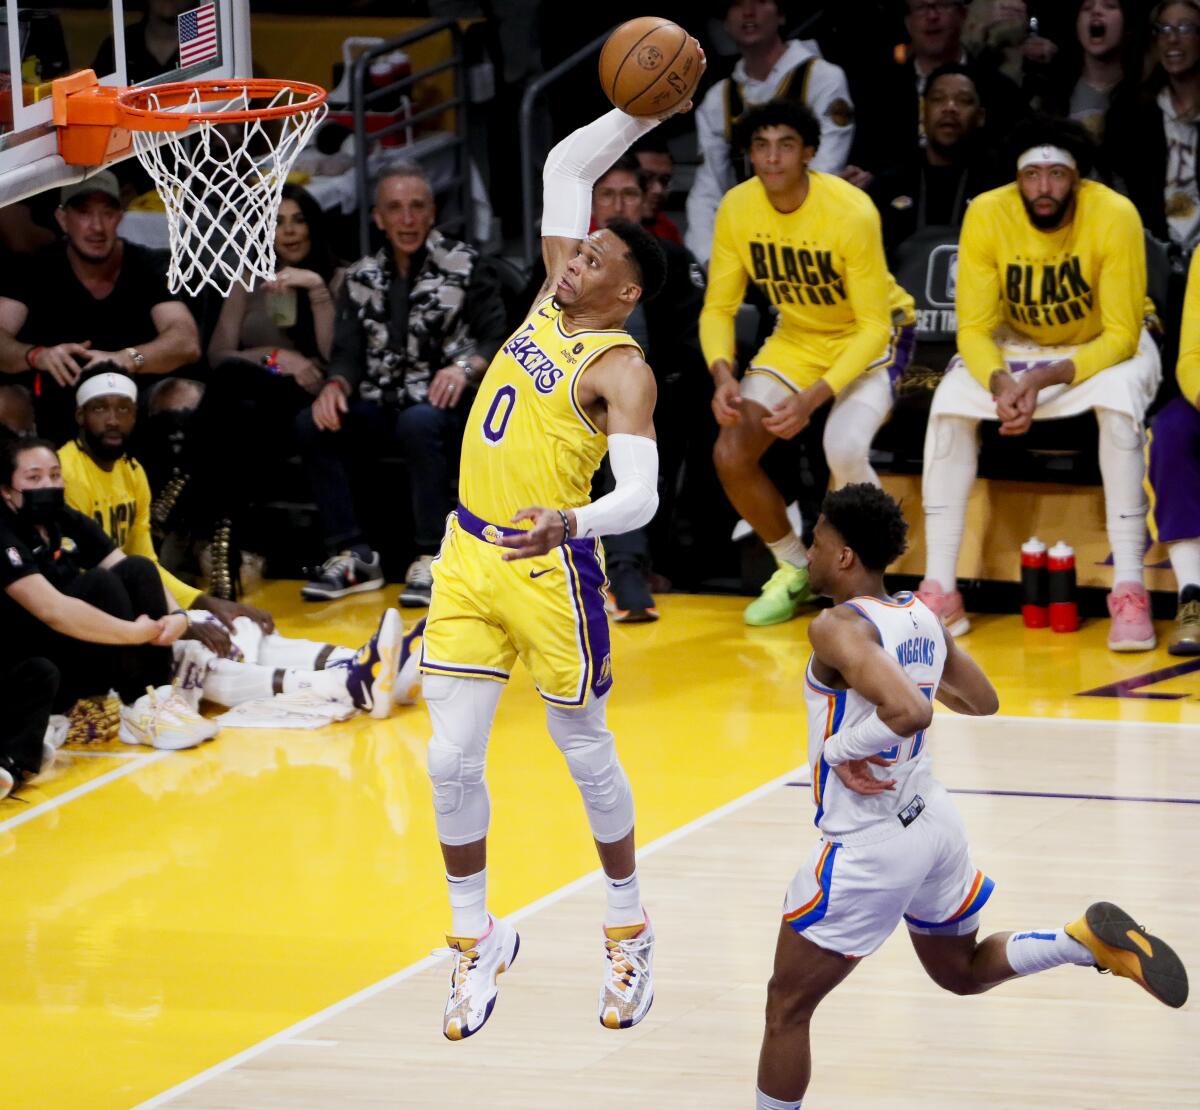 Russell Westbrook elevates for a tomahawk dunk while playing for the Lakers this season.